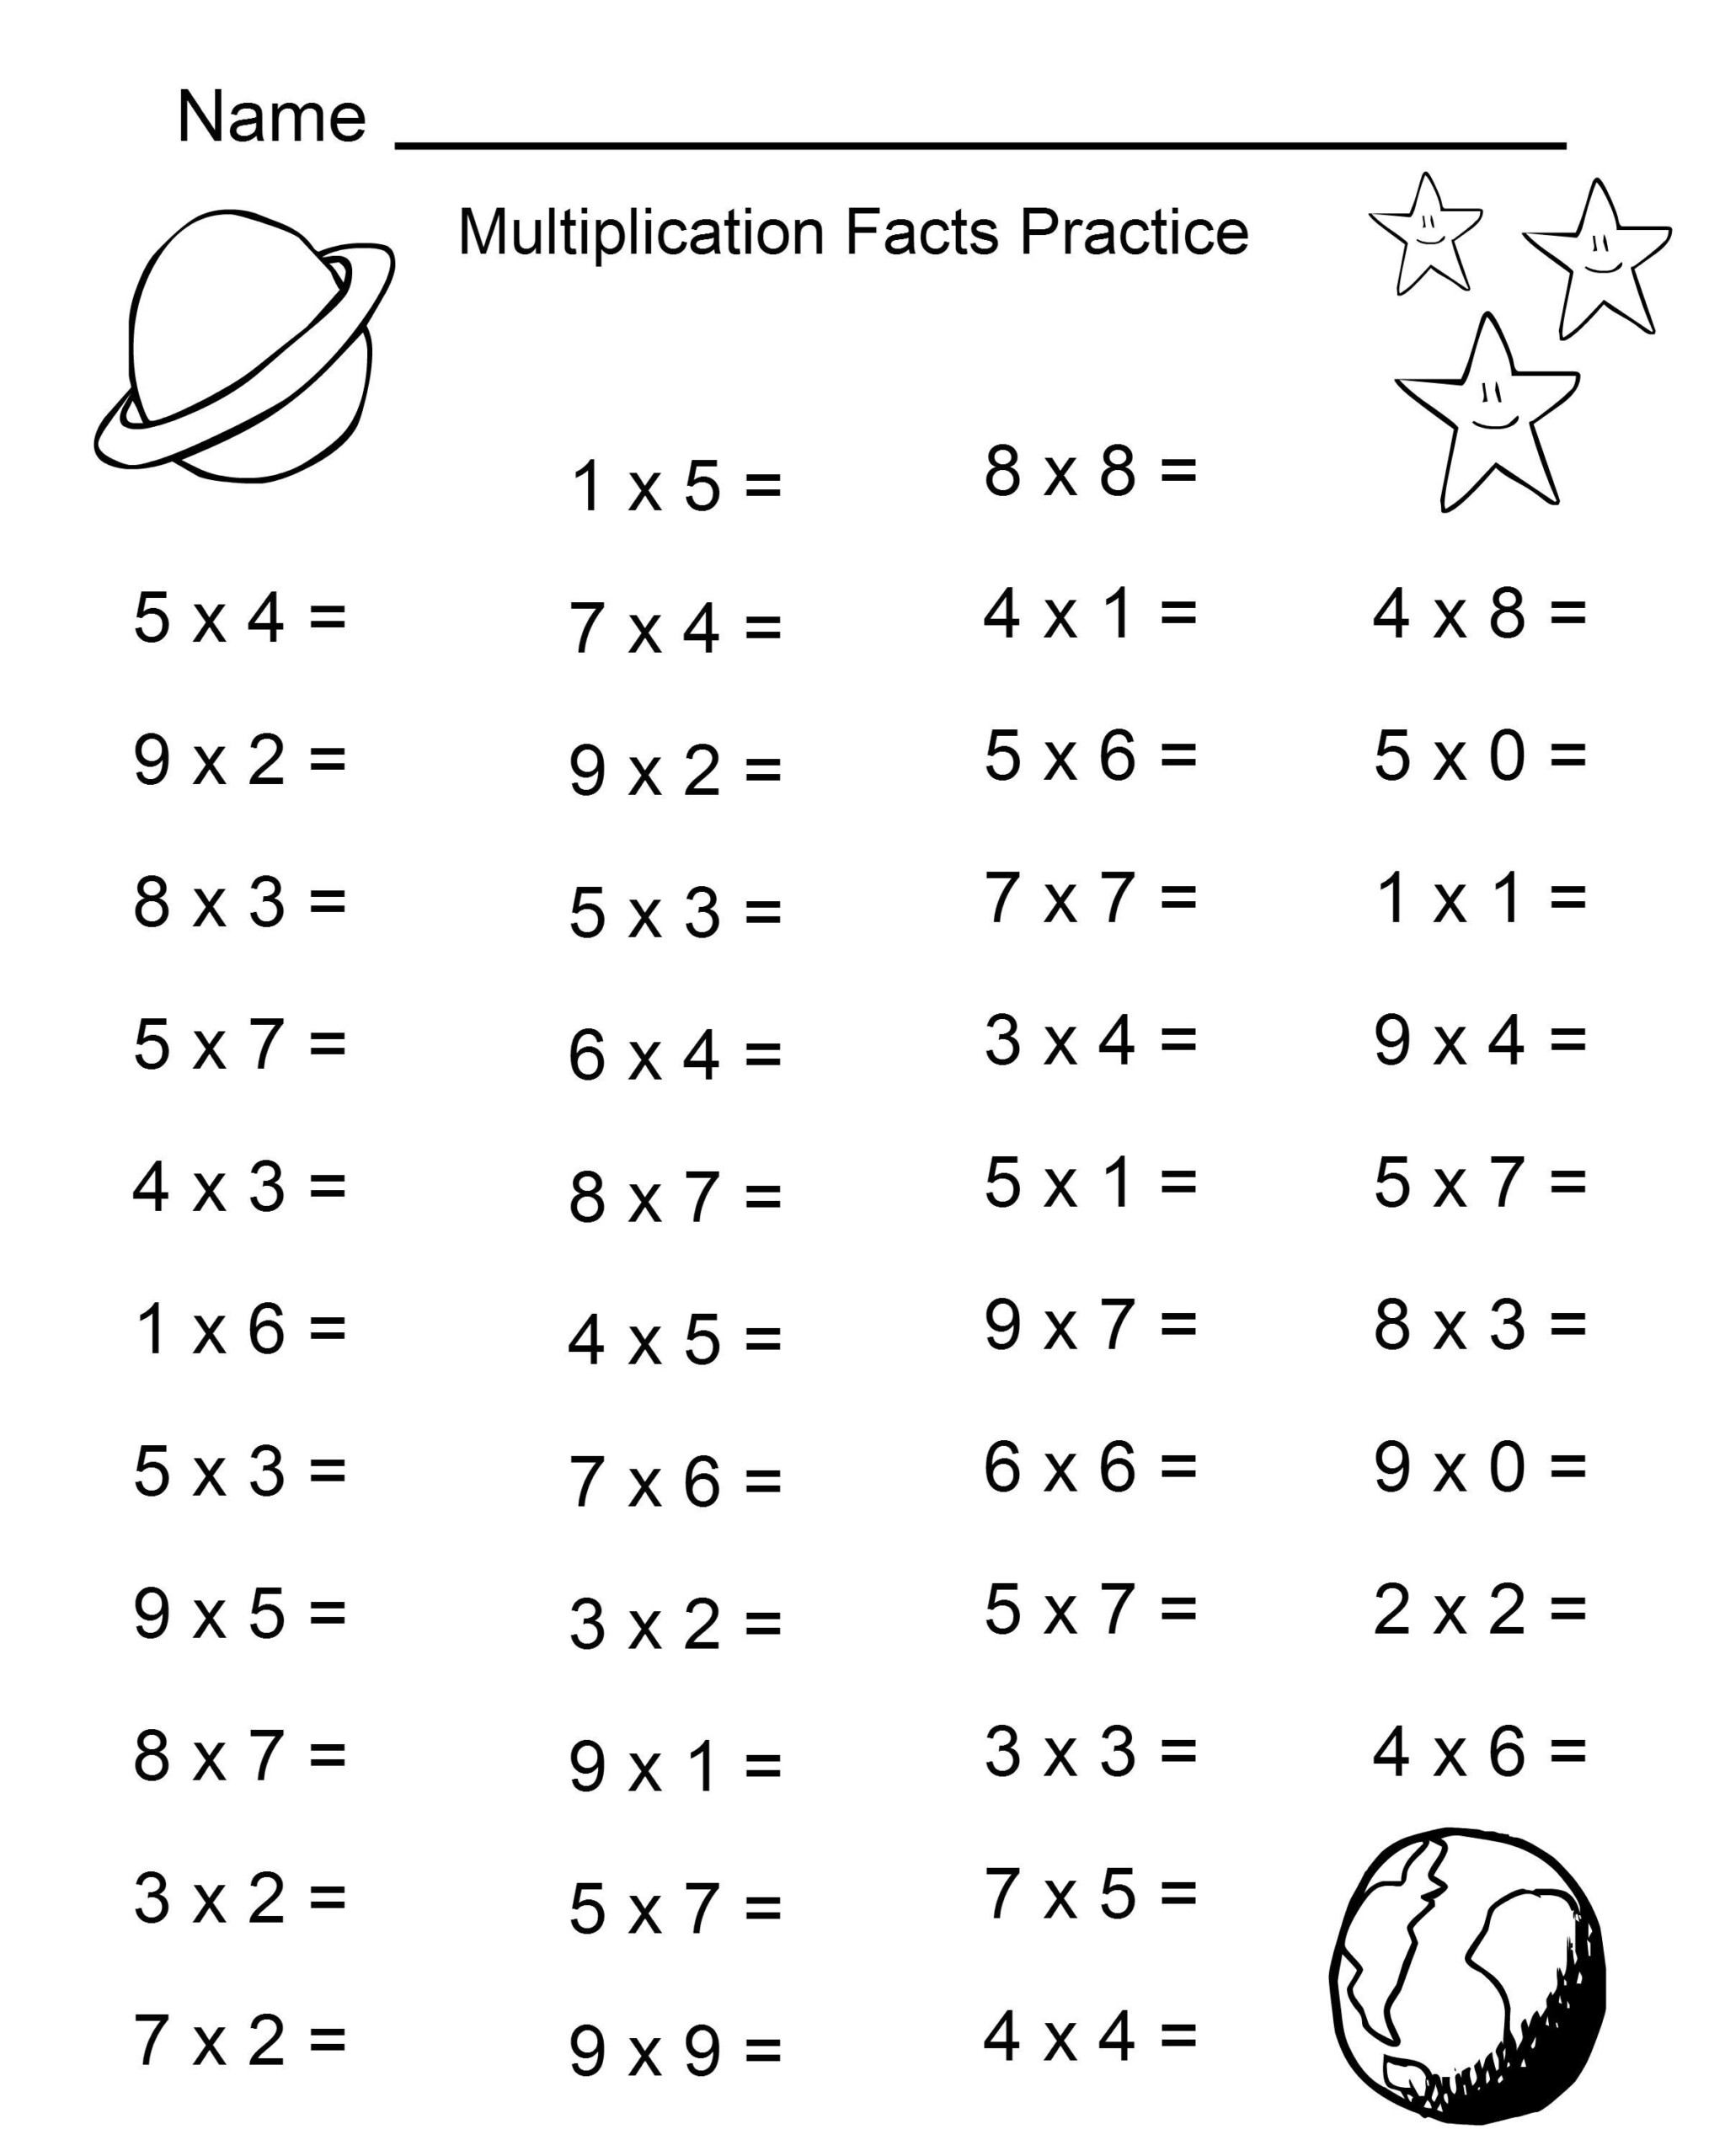 multiplication-by-1s-printable-worksheets